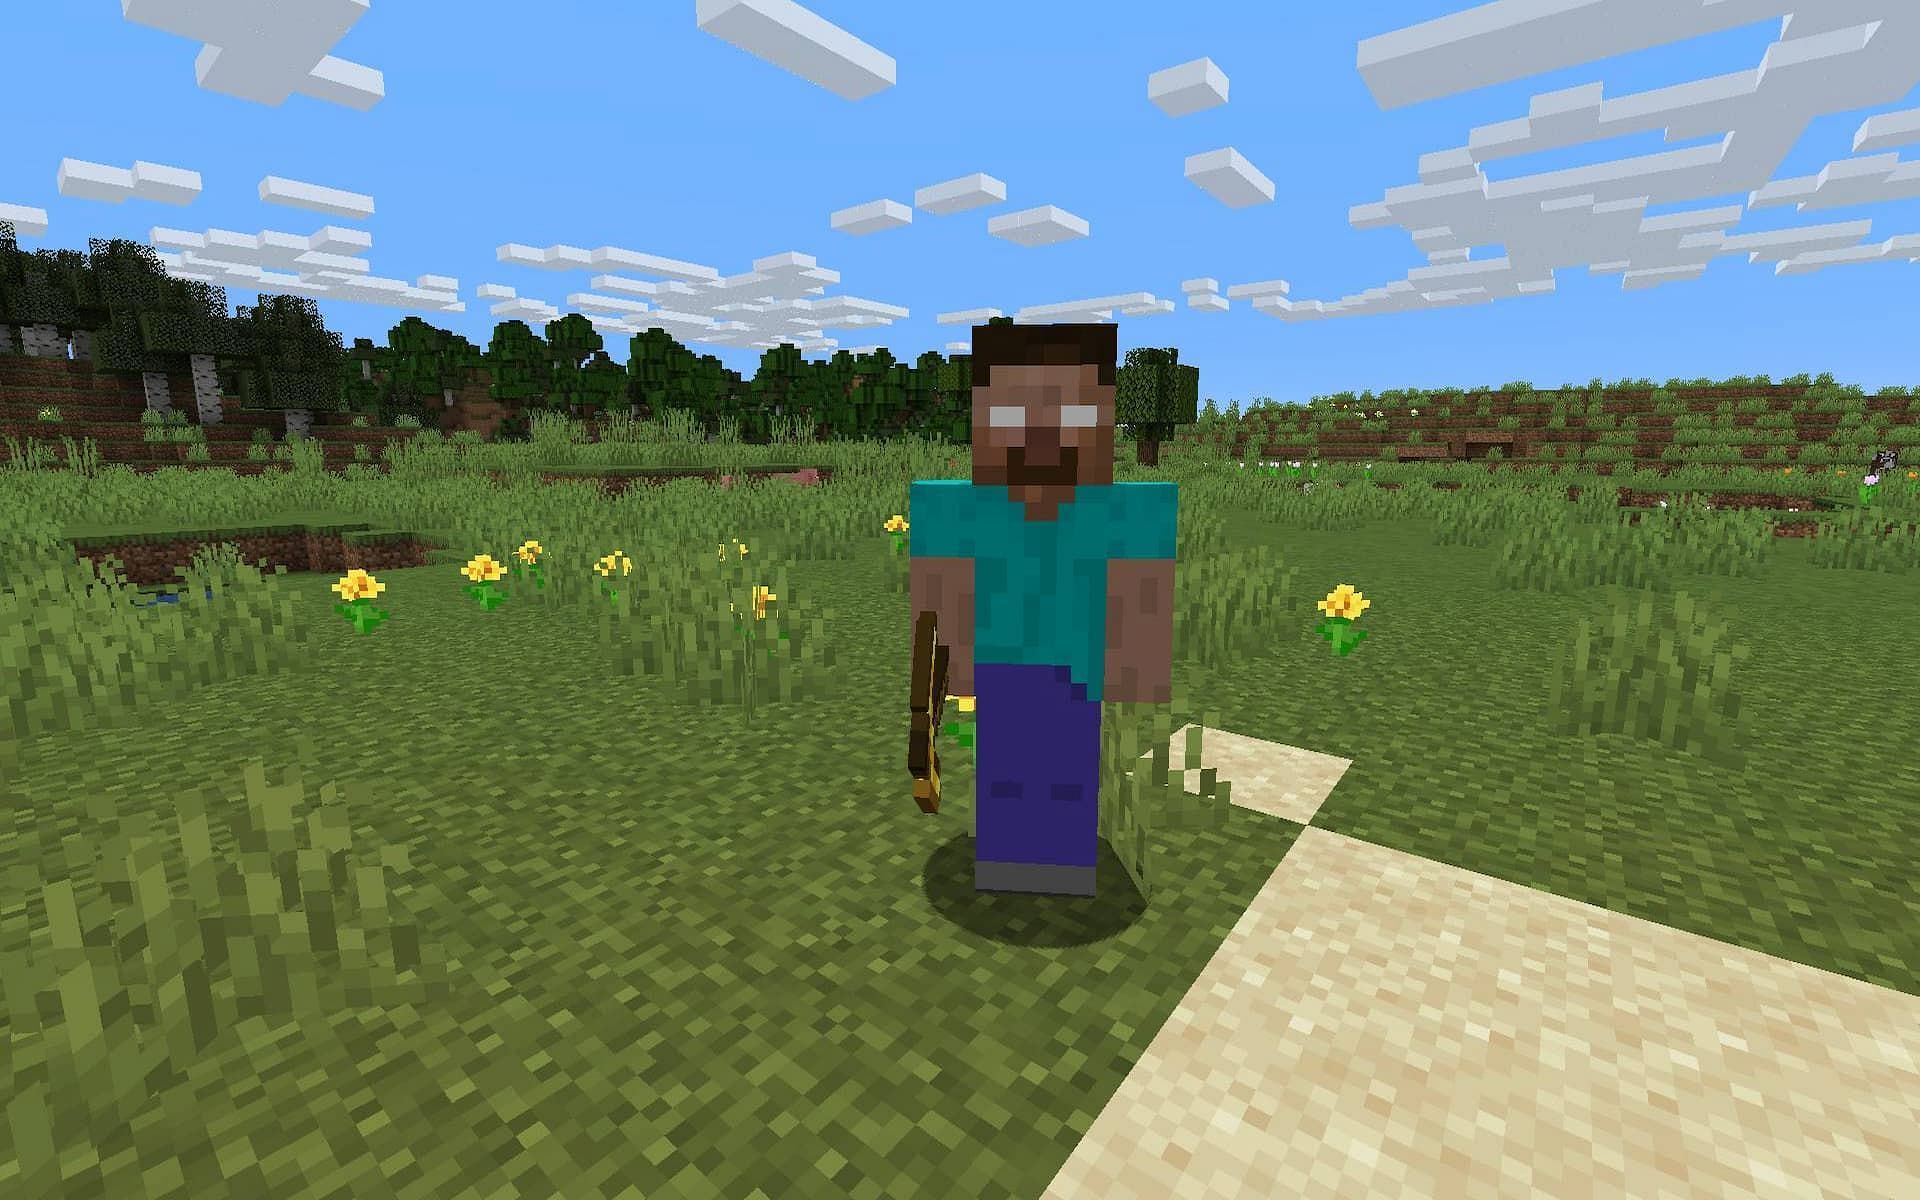 Herobrine can visit the player